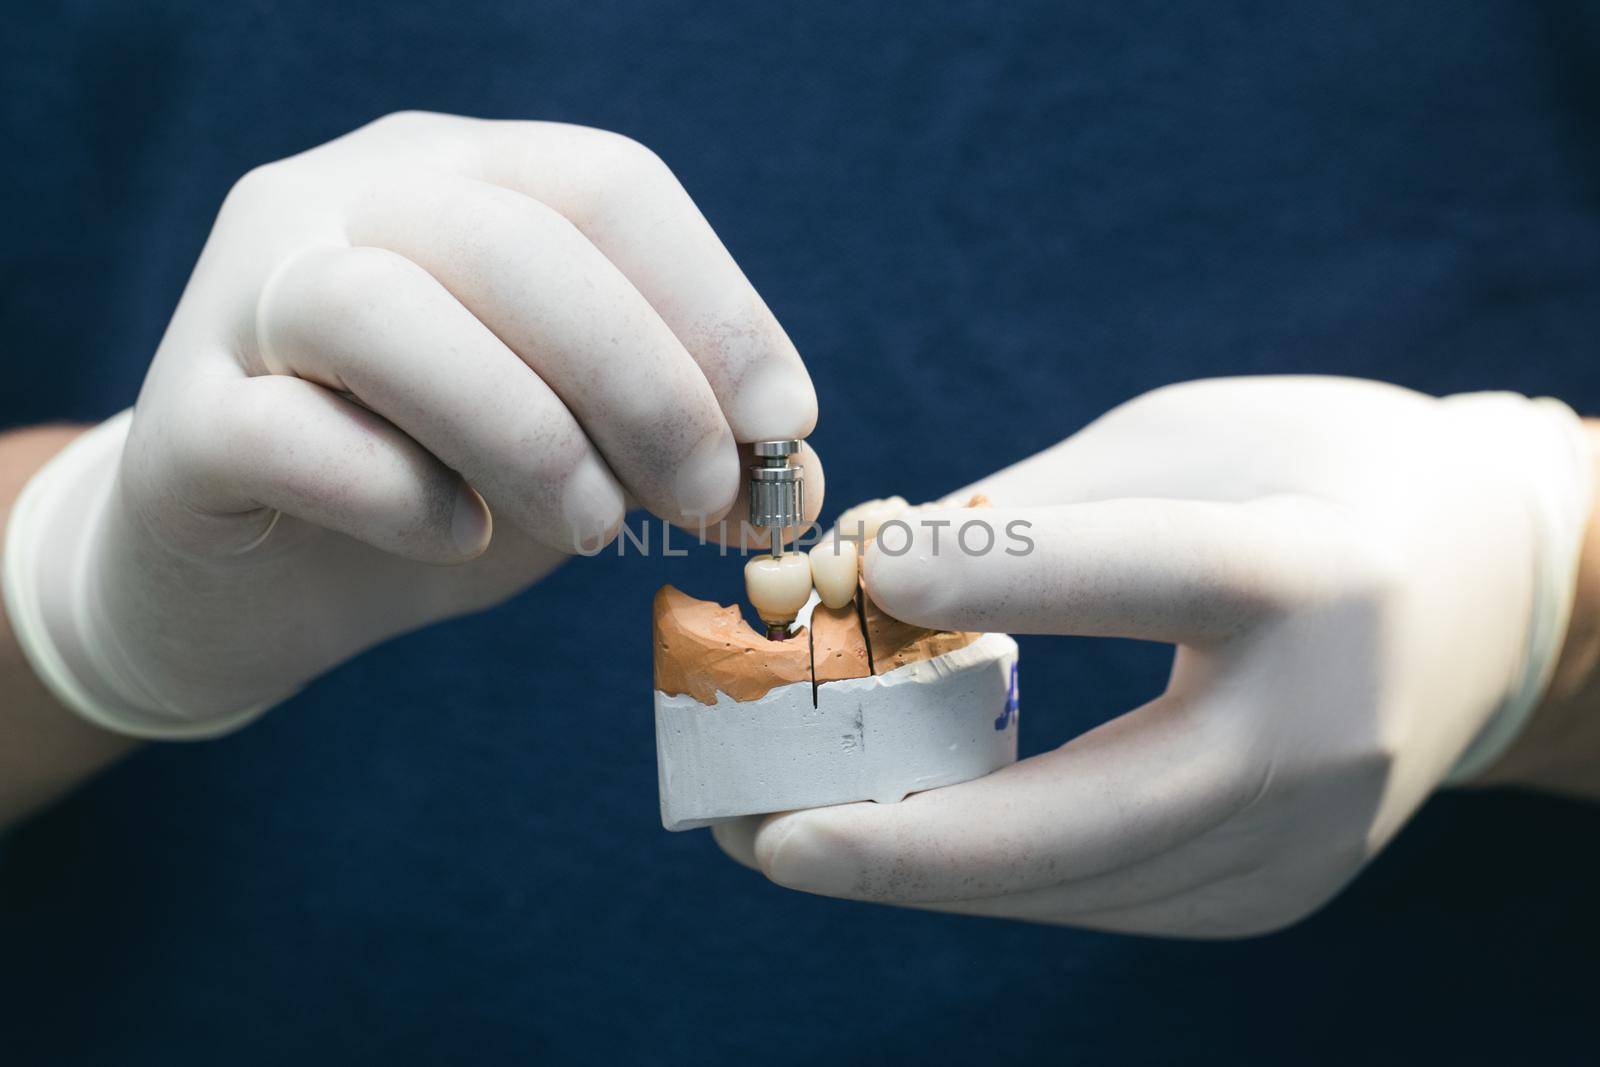 Concept of orthopedic dentistry. Ceramic teeth with the implant on a plaster model. Prosthetics on dental implants. Ceramic bridge on implants. Dentist's hand holds a plaster jaw with dental abutments